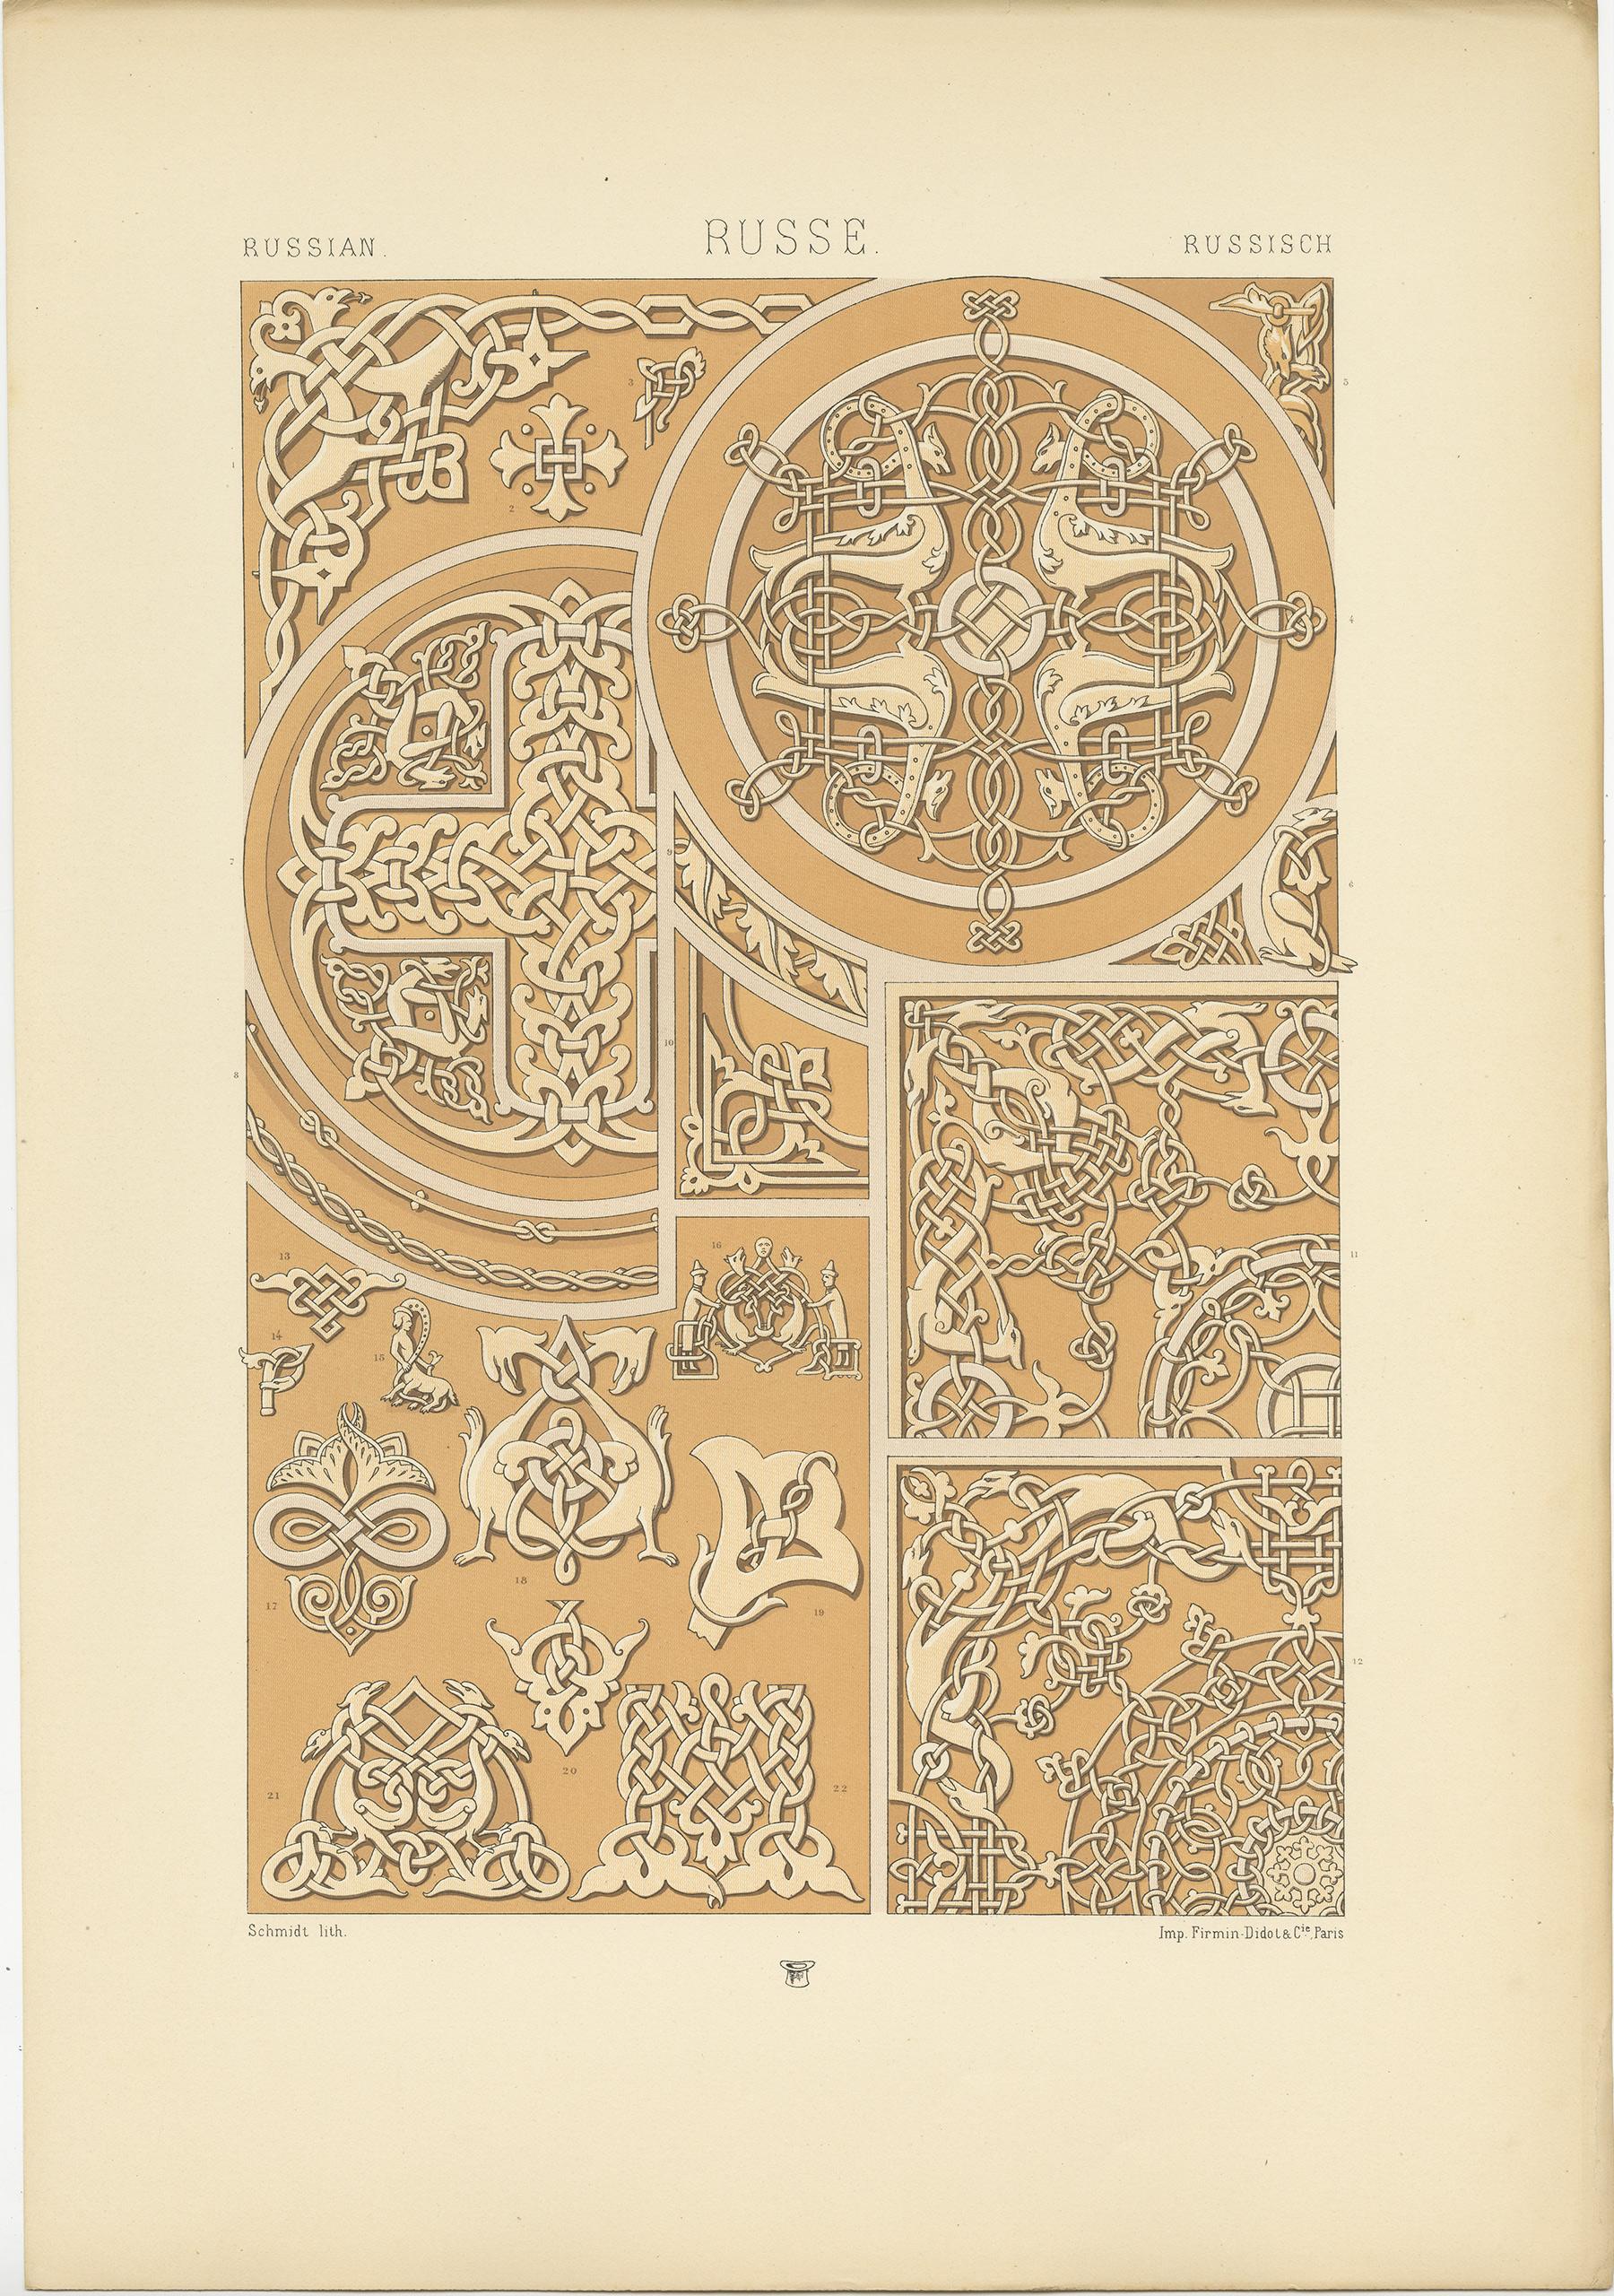 Antique print titled 'Russian - Russe - Russische'. Chromolithograph of motifs from metalwork and manuscripts 12th-15th centuries ornaments. This print originates from 'l'Ornement Polychrome' by Auguste Racinet. Published circa 1890.